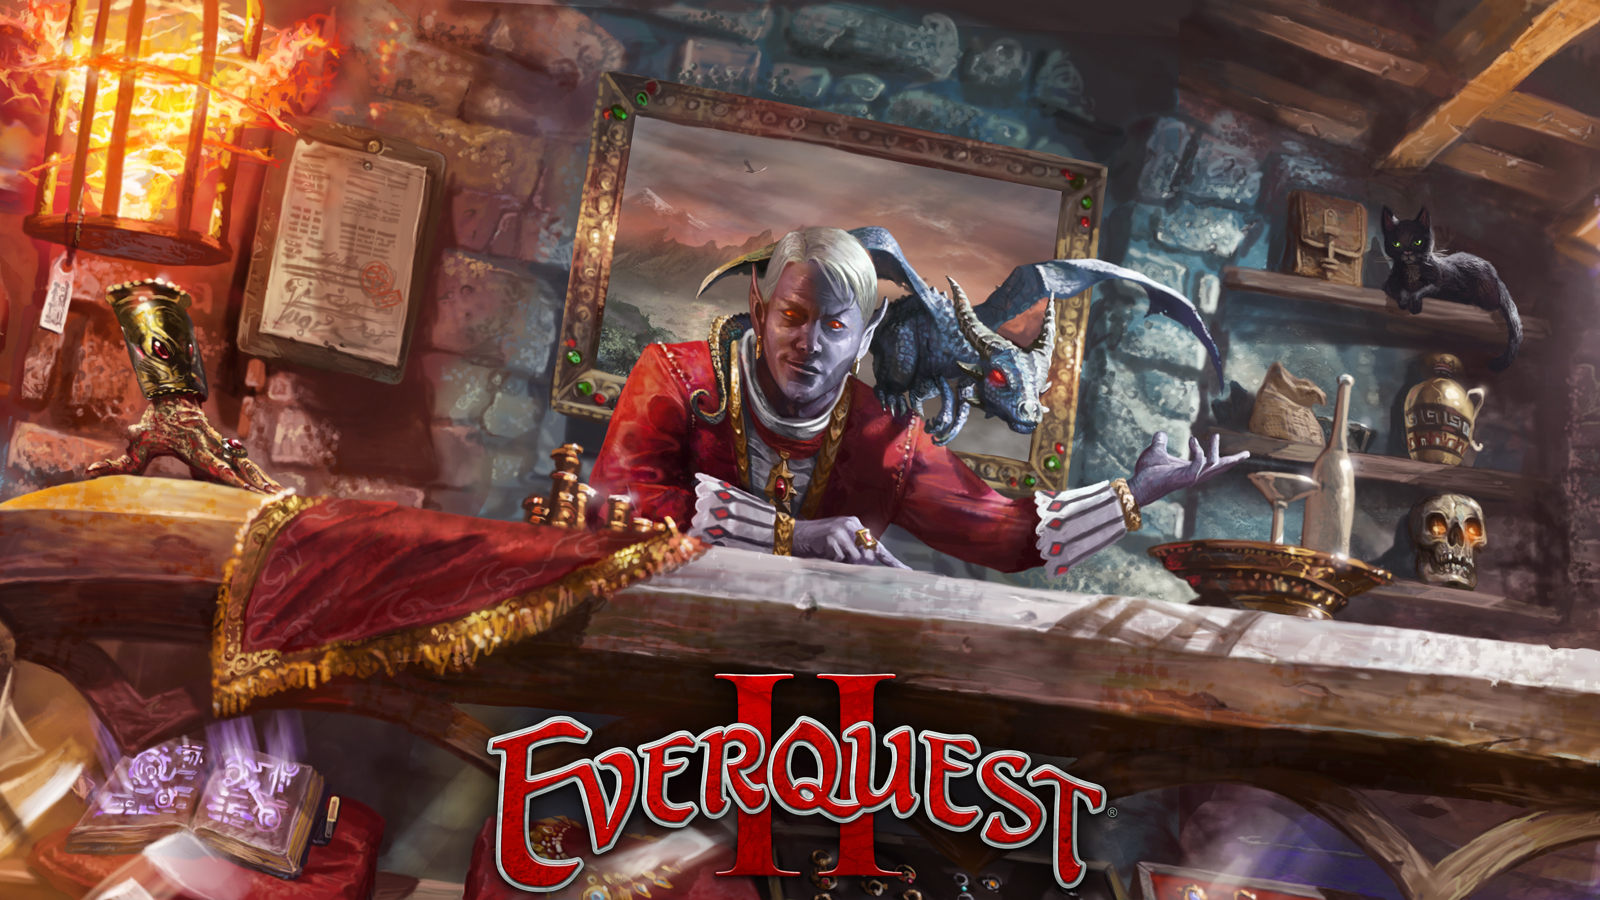 EverQuest II Swag Store Incoming!